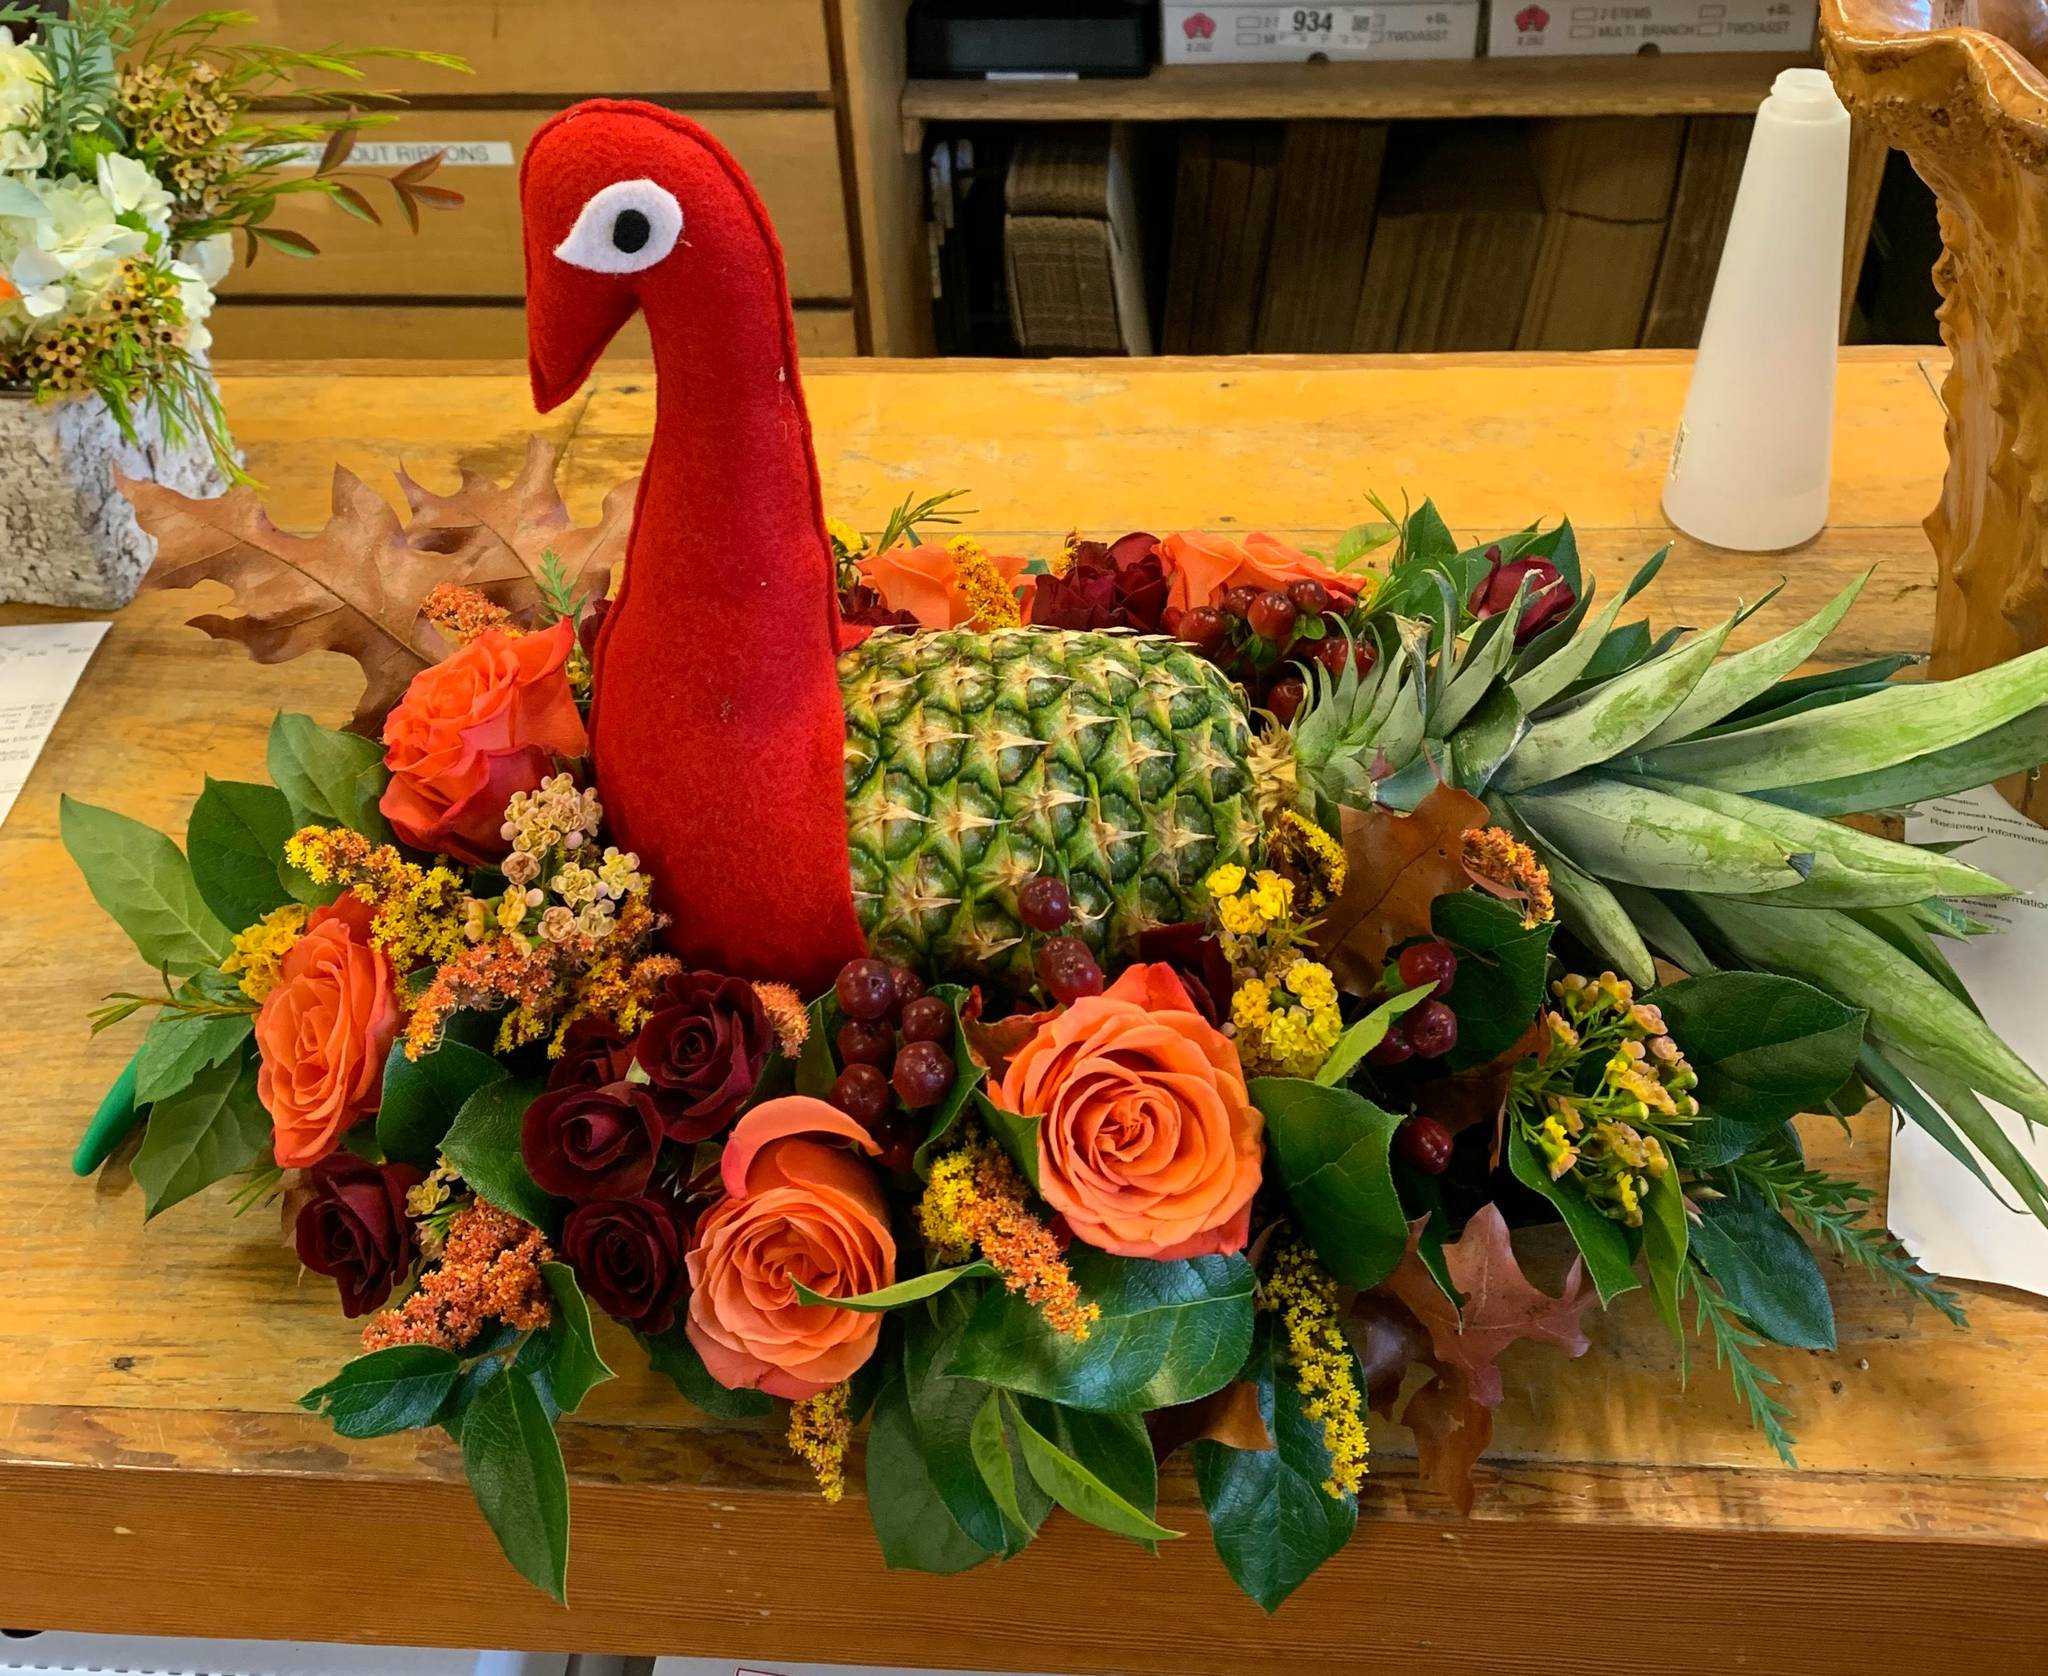 Here’s a Mercer Island Florist tradition, the Pineapple Turkey, for Thanksgiving. Courtesy photo